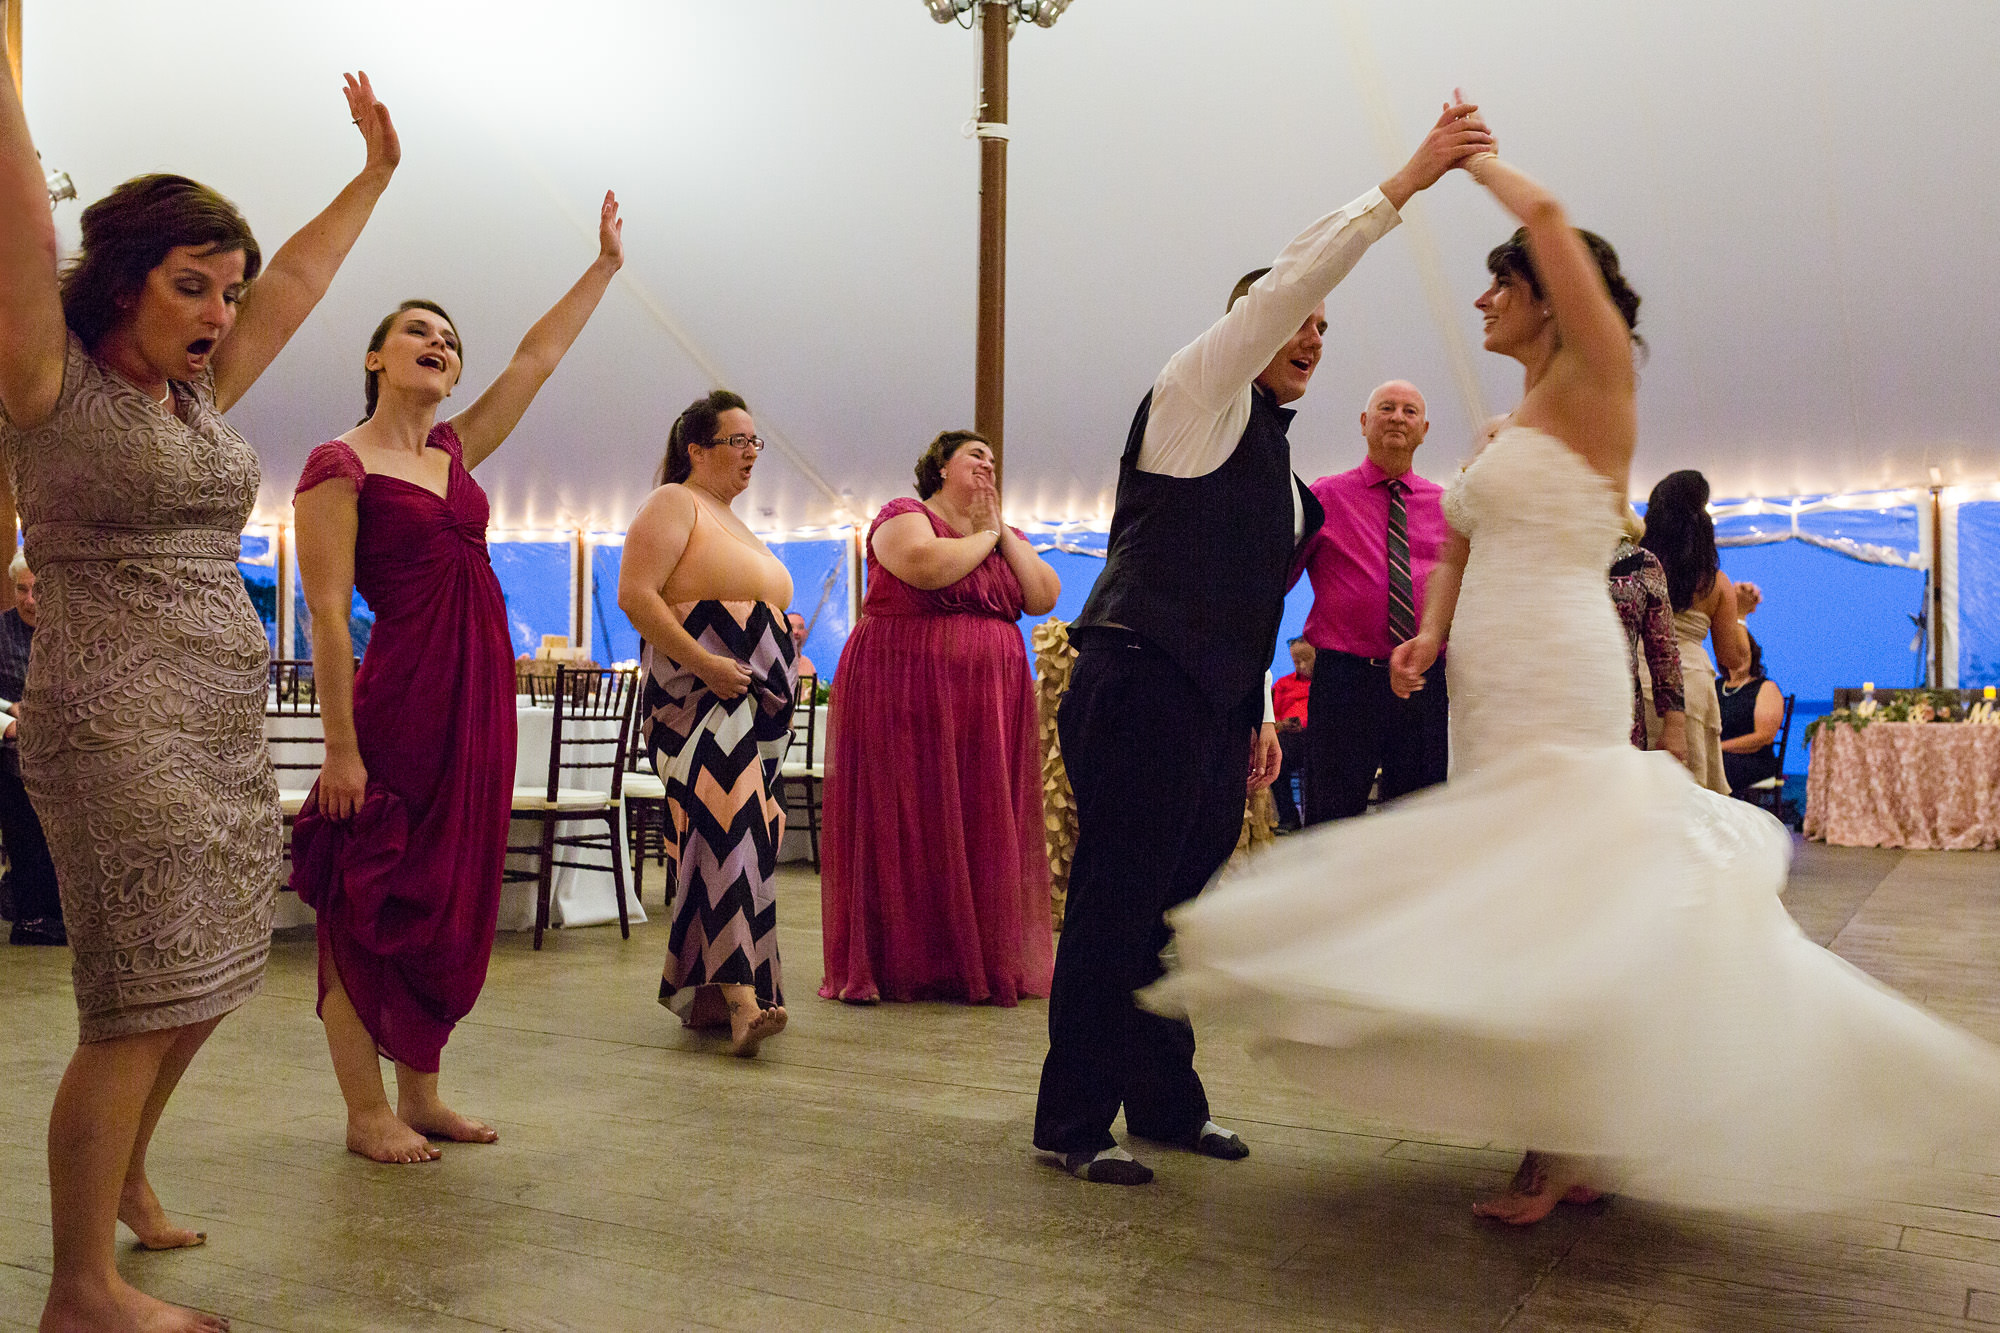 The bride, groom, and their friends dance during their wedding reception at French's Point in Maine